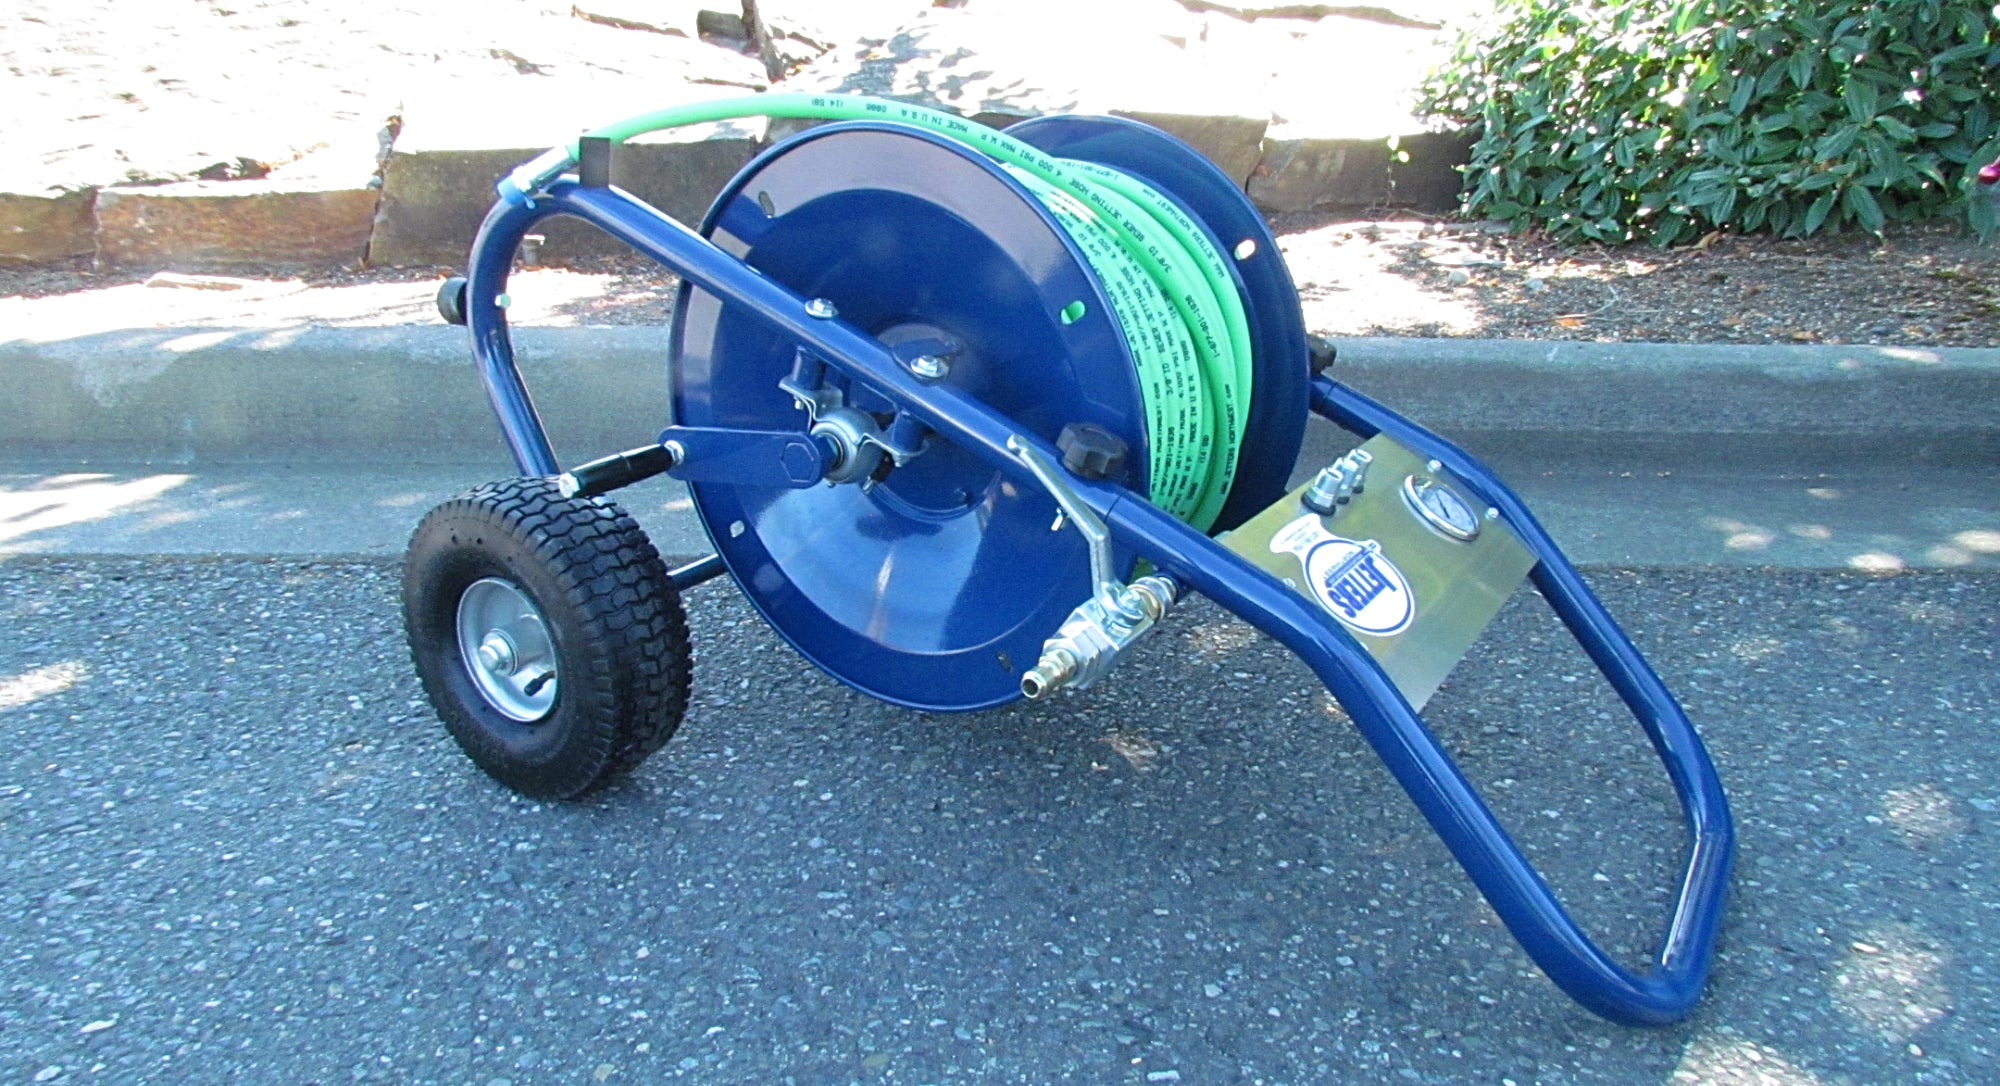 Portable Heavy Duty Deluxe Hose Reel with Jetter Hose – Jetters